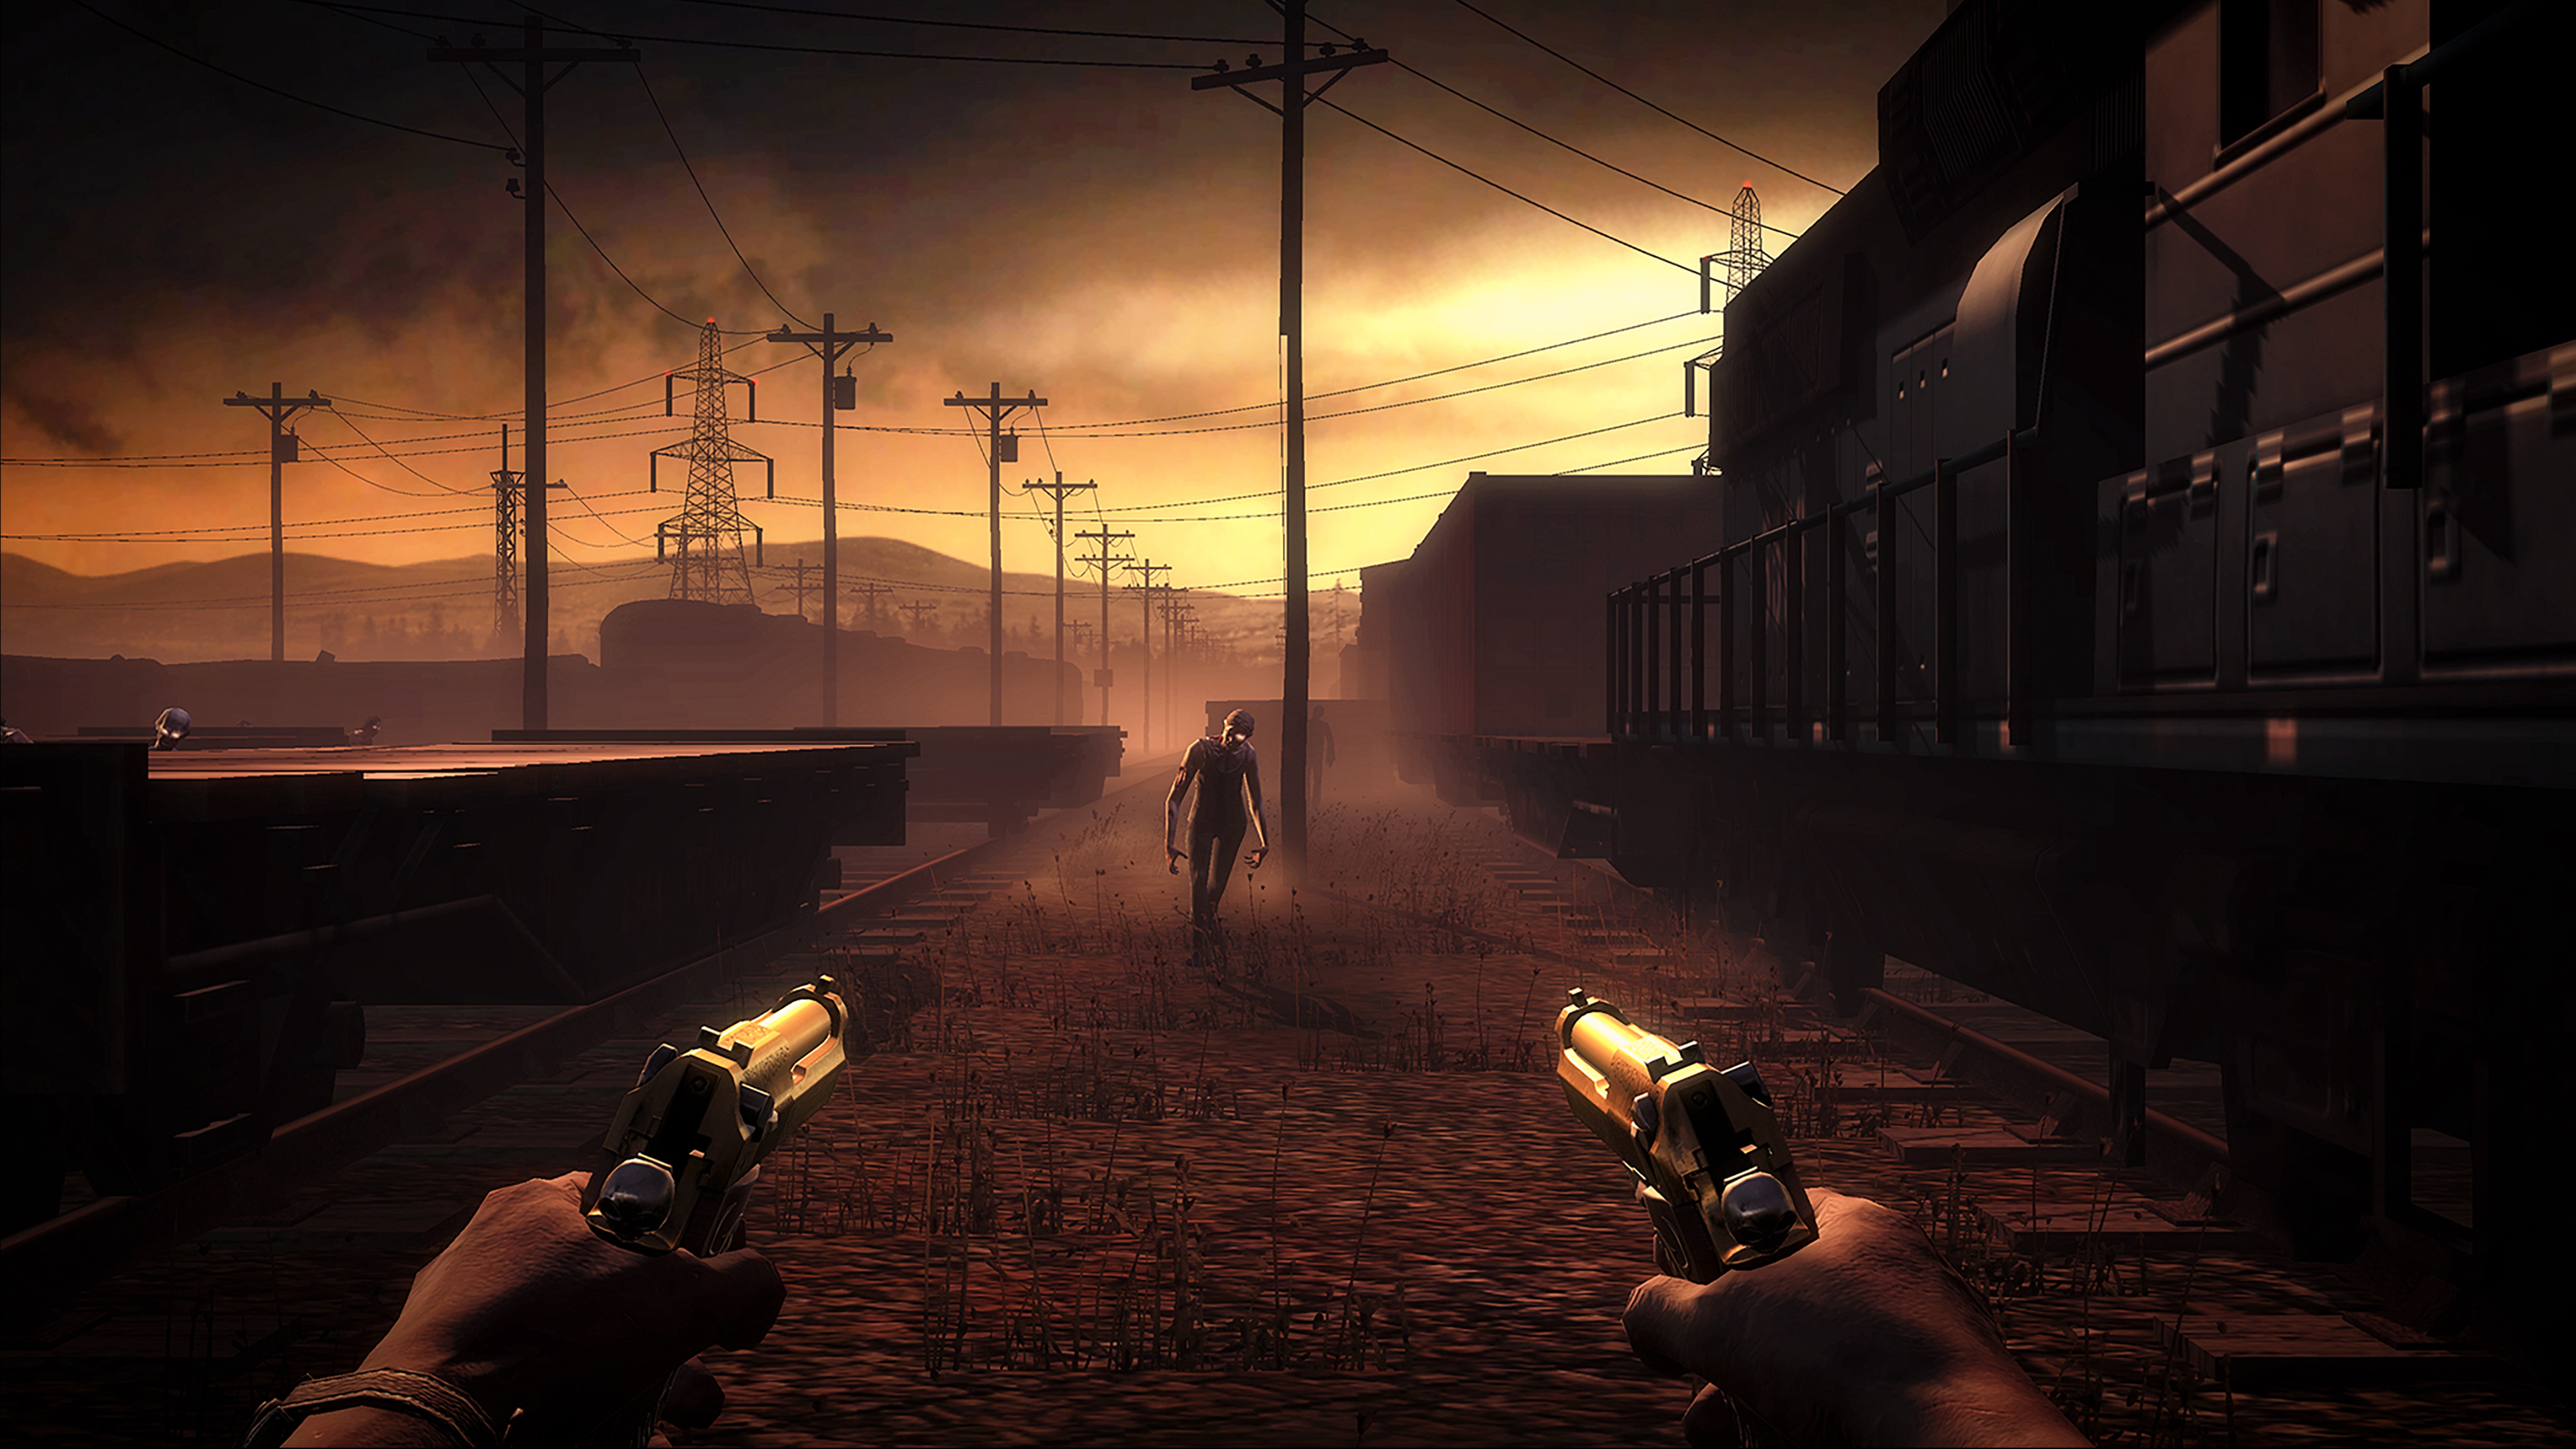 Netflix Releasing First Person Shooter Video Game: What Investors Need To Know